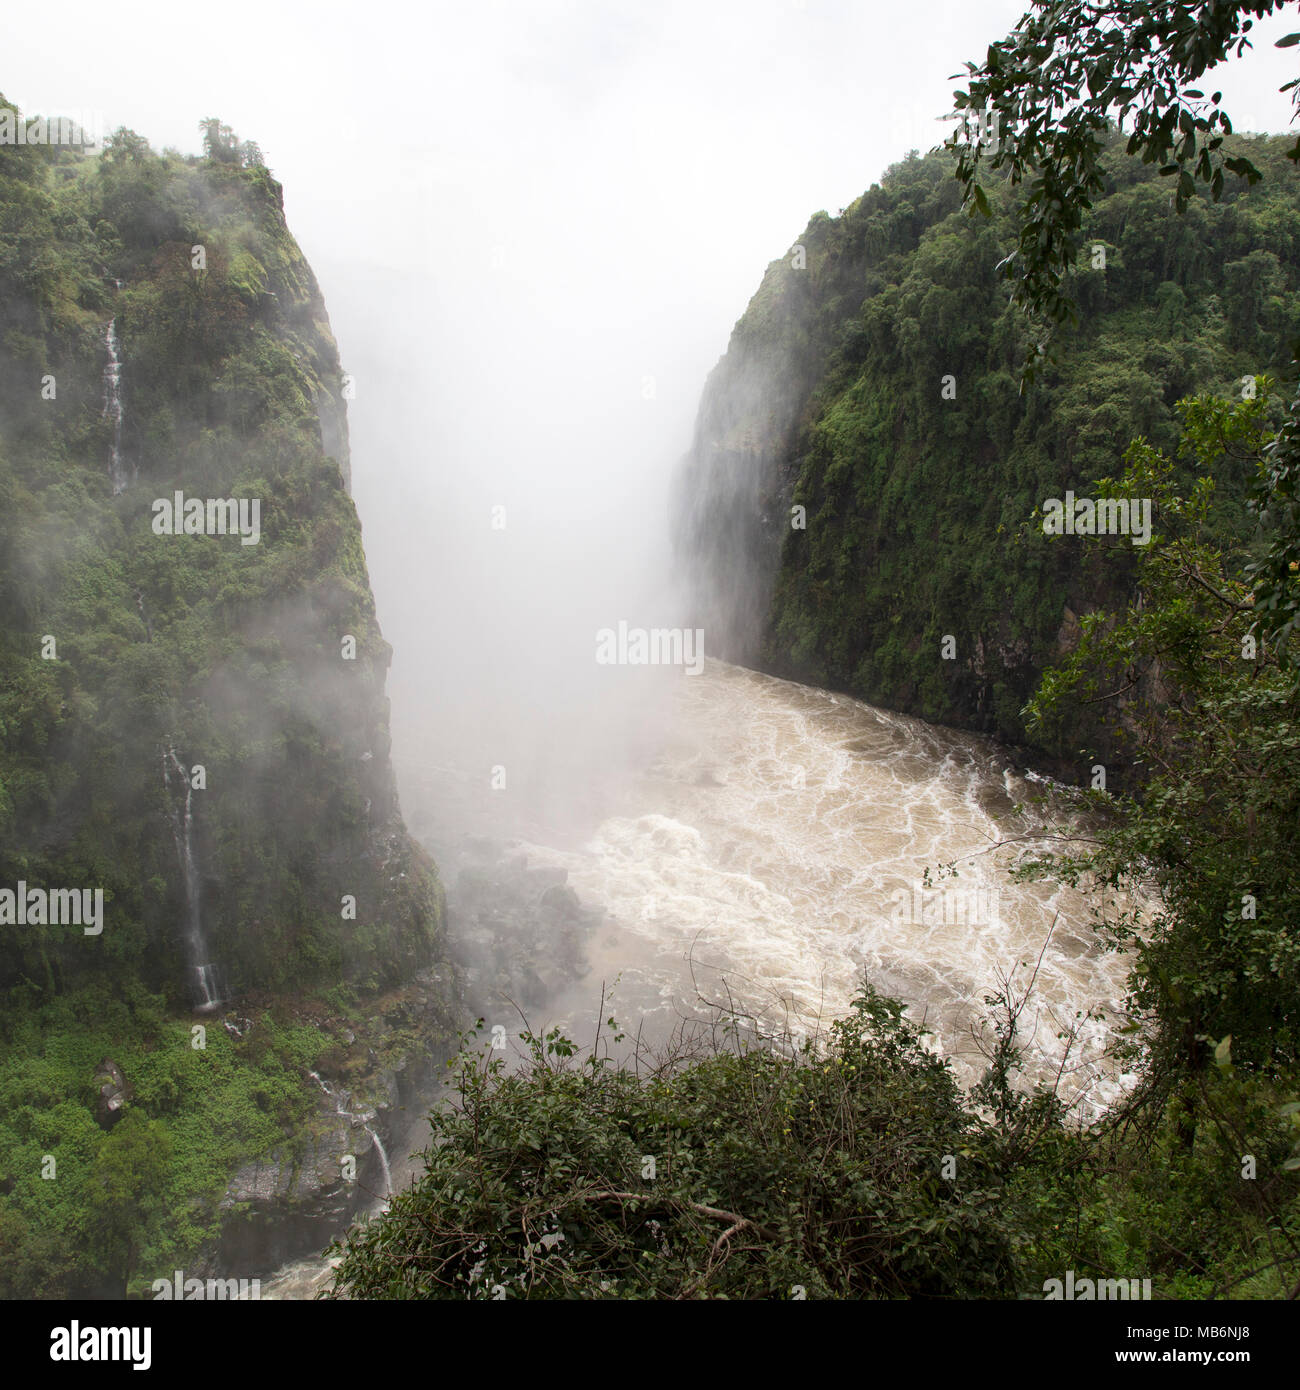 Misty spray caused by the Victoria Falls on the border of Zimbabwe and Zambia. The swirling water of the River Zambezi flows in the gorge. Stock Photo